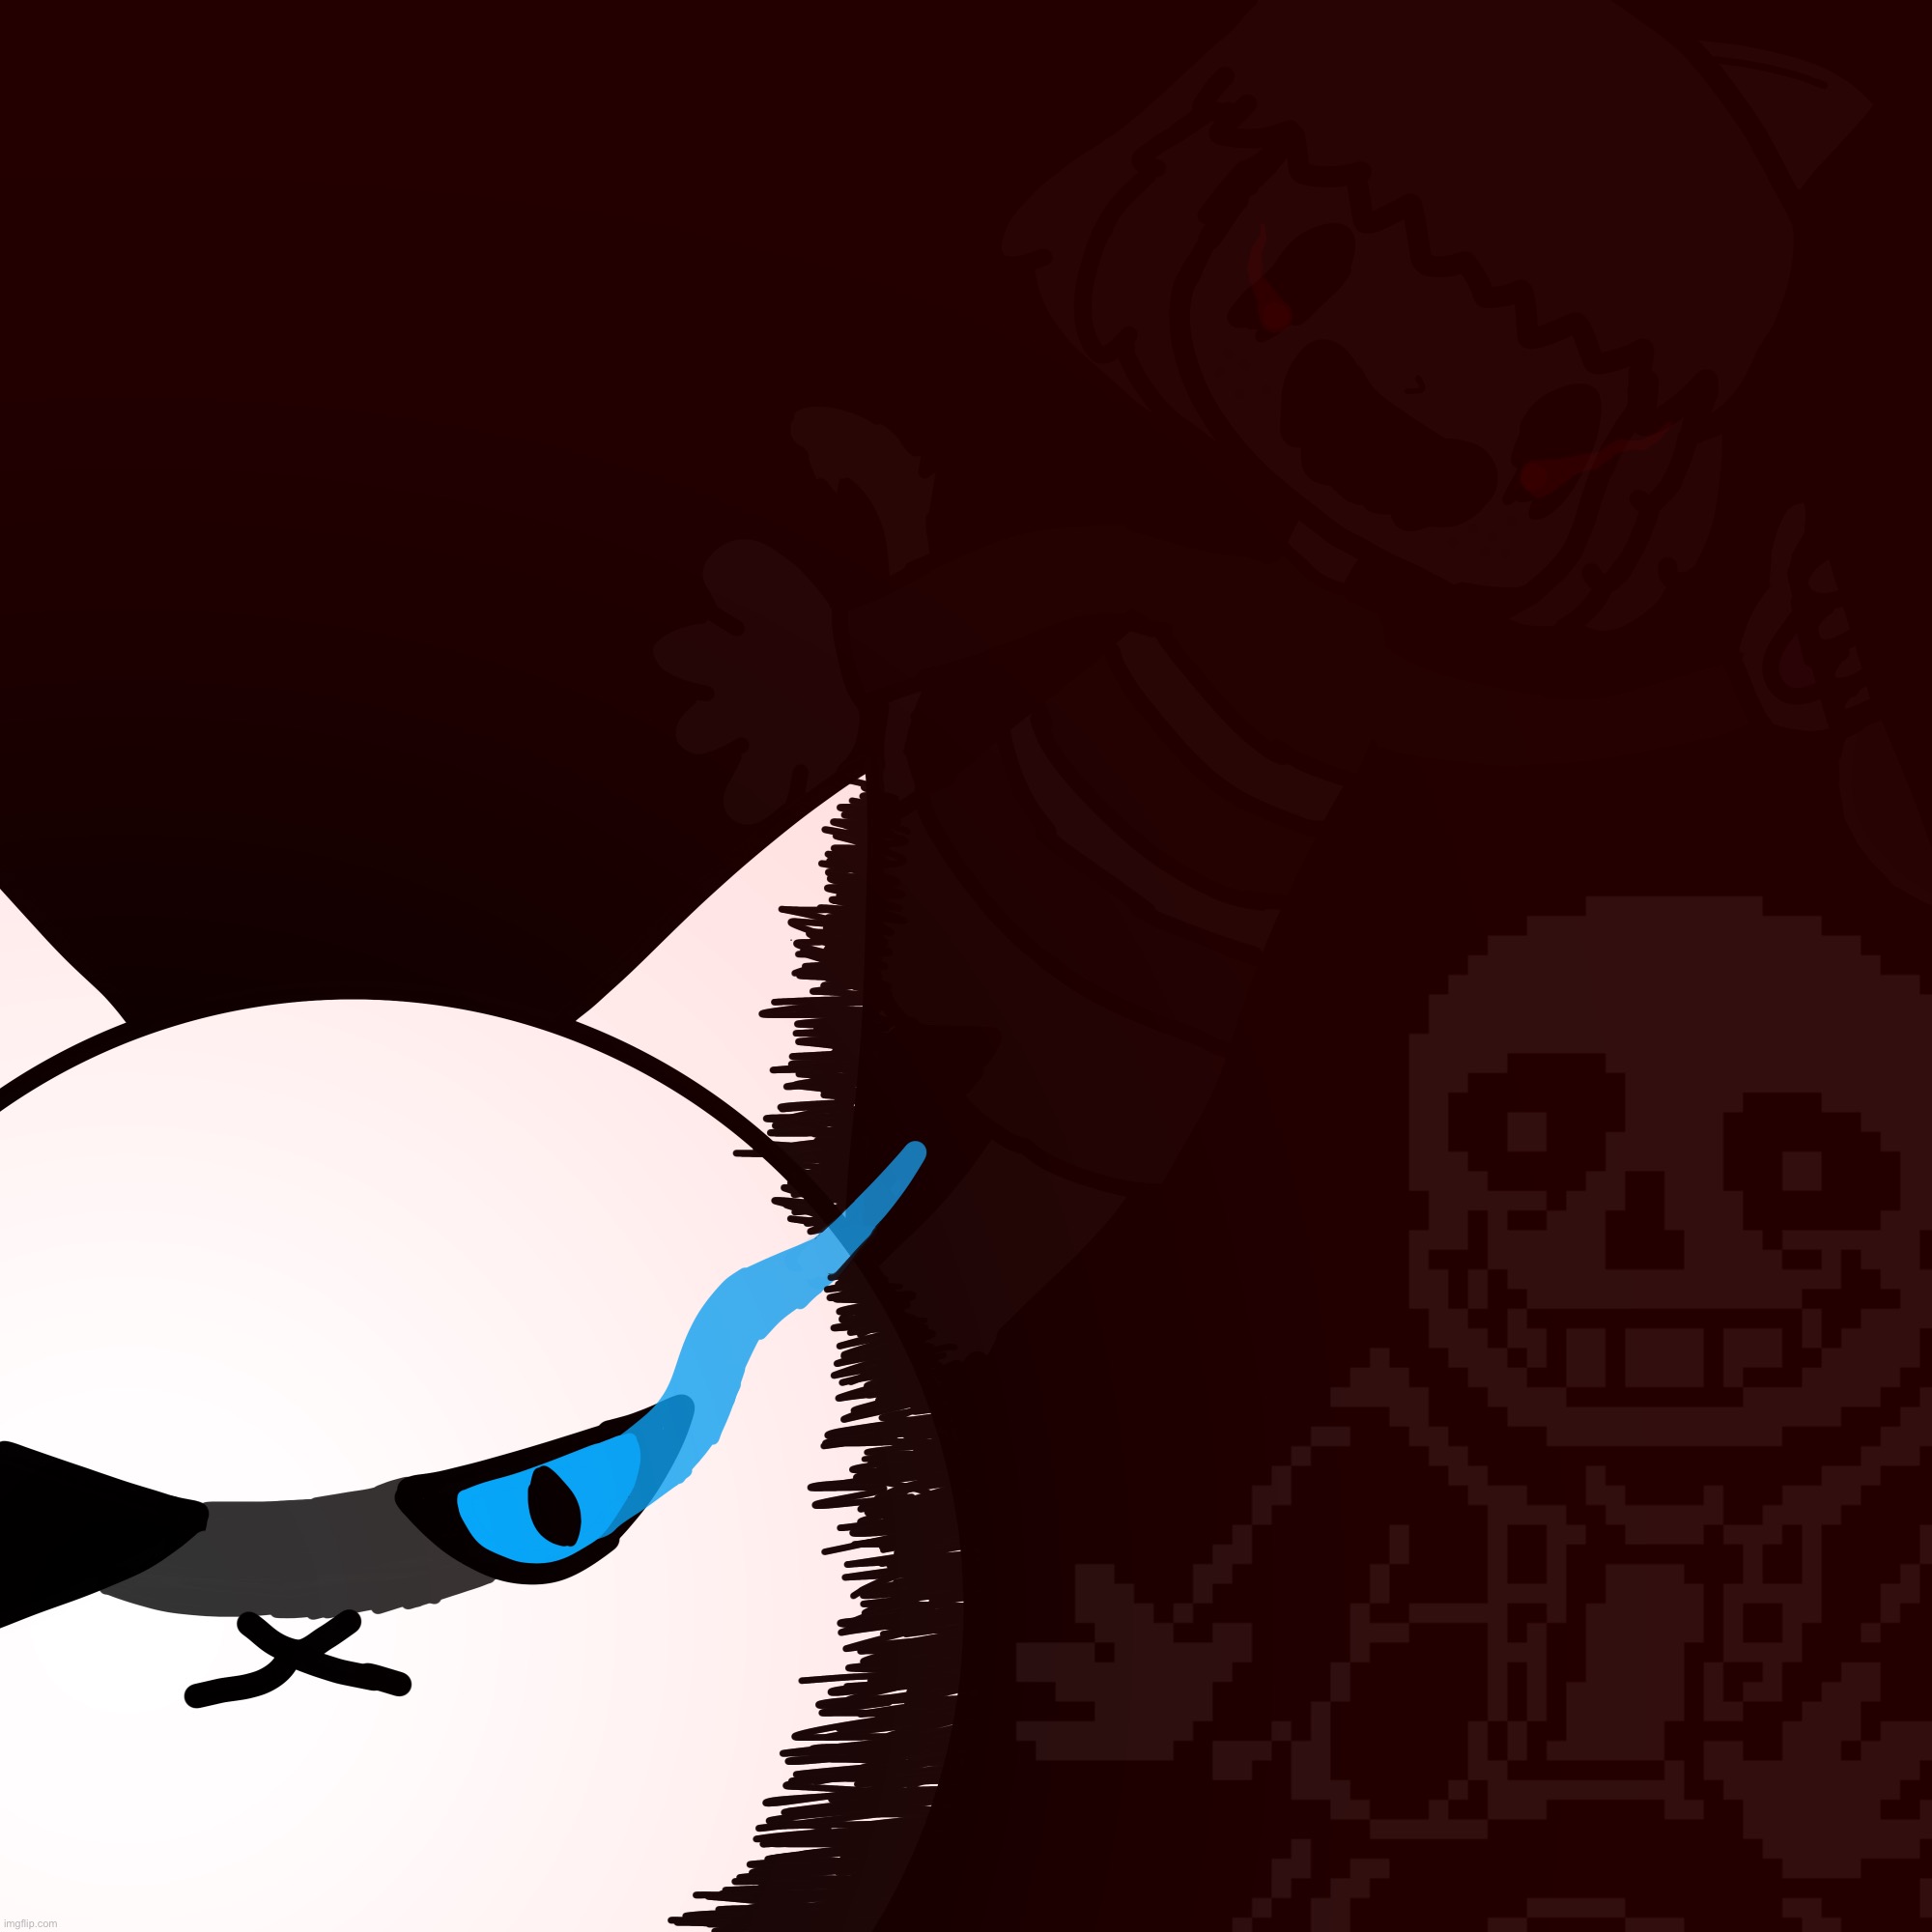 The Cat, The Killer, and The- Whoa hey pal lets back it up a bit | image tagged in memes,funny,drawings,cats,sans,undertale | made w/ Imgflip meme maker